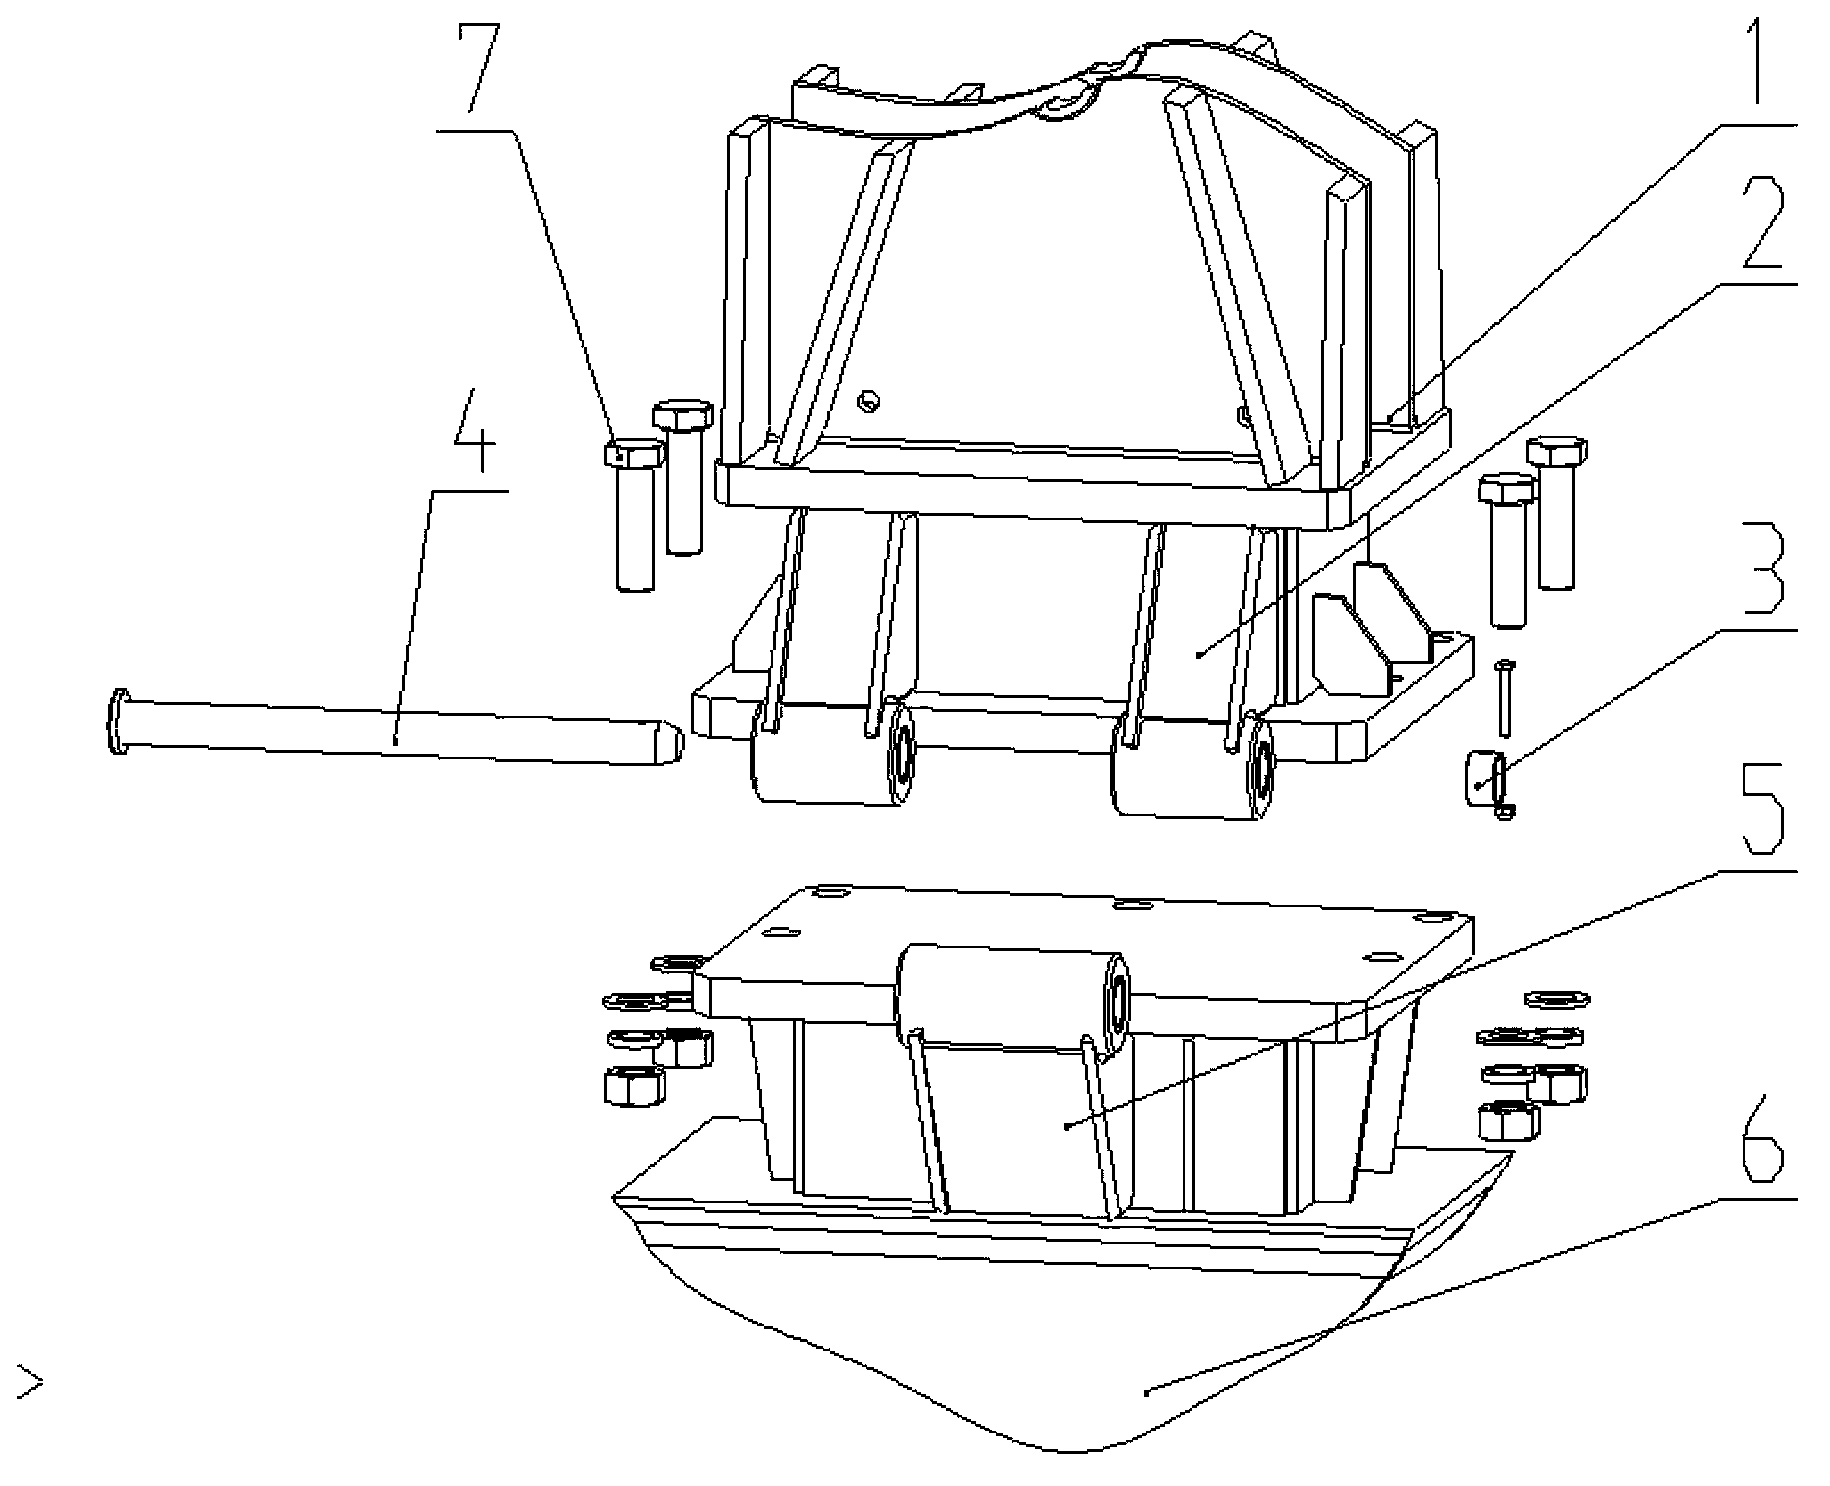 Mounting mechanism of continuous wall grab bucket